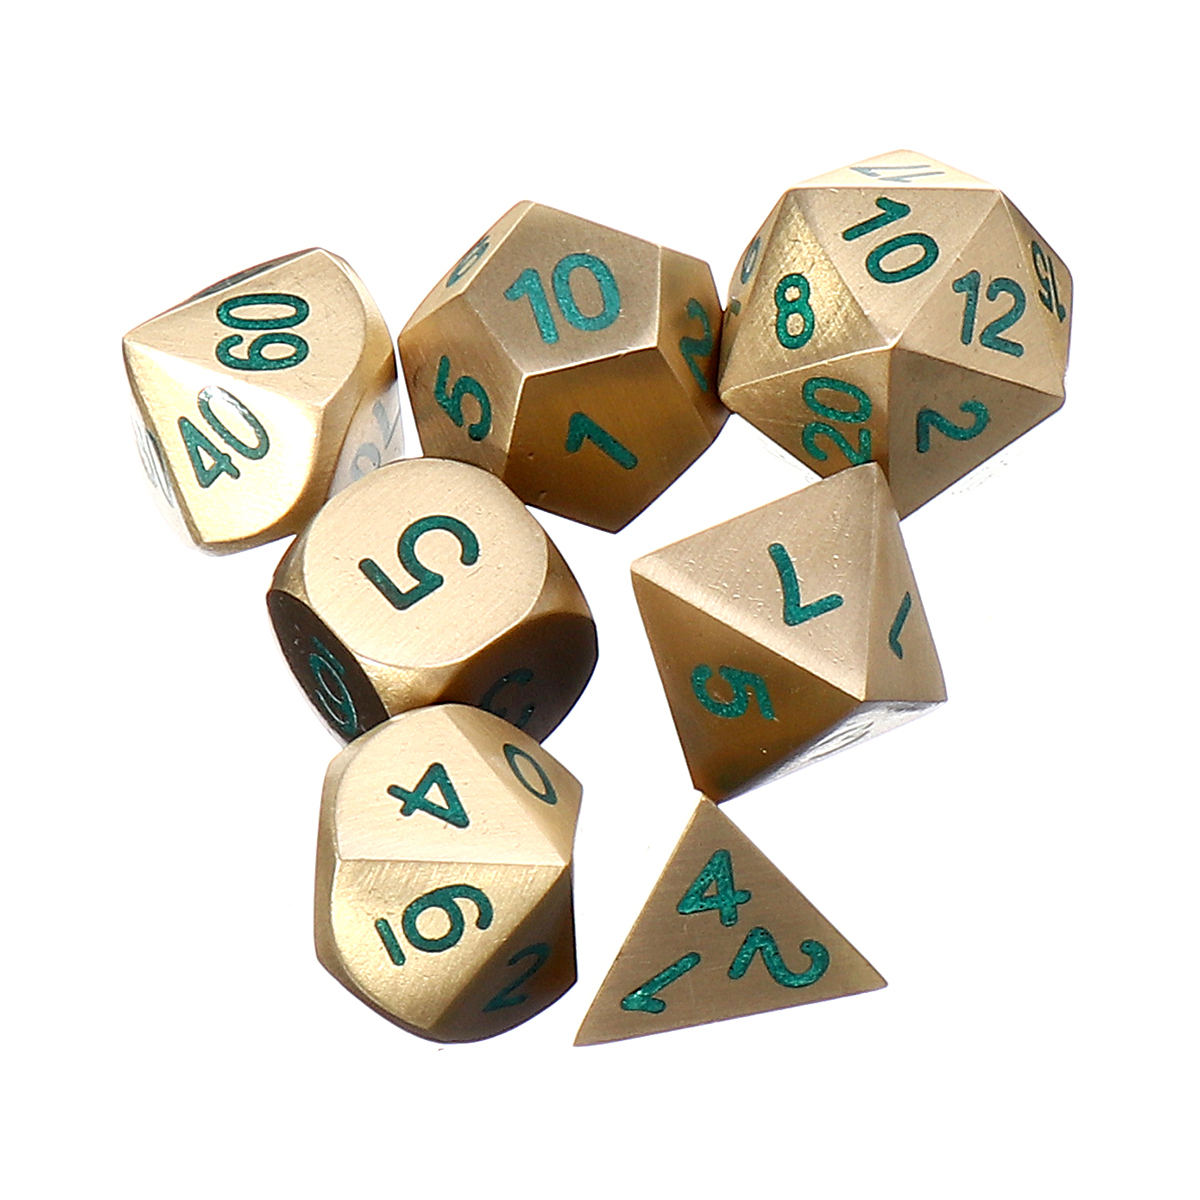 Pure-Copper-Polyhedral-Dices-Set-Metal-Role-Playing-Game-Dice-Gadget-for-Dungeons-Dragon-Games-Gift-1608120-9